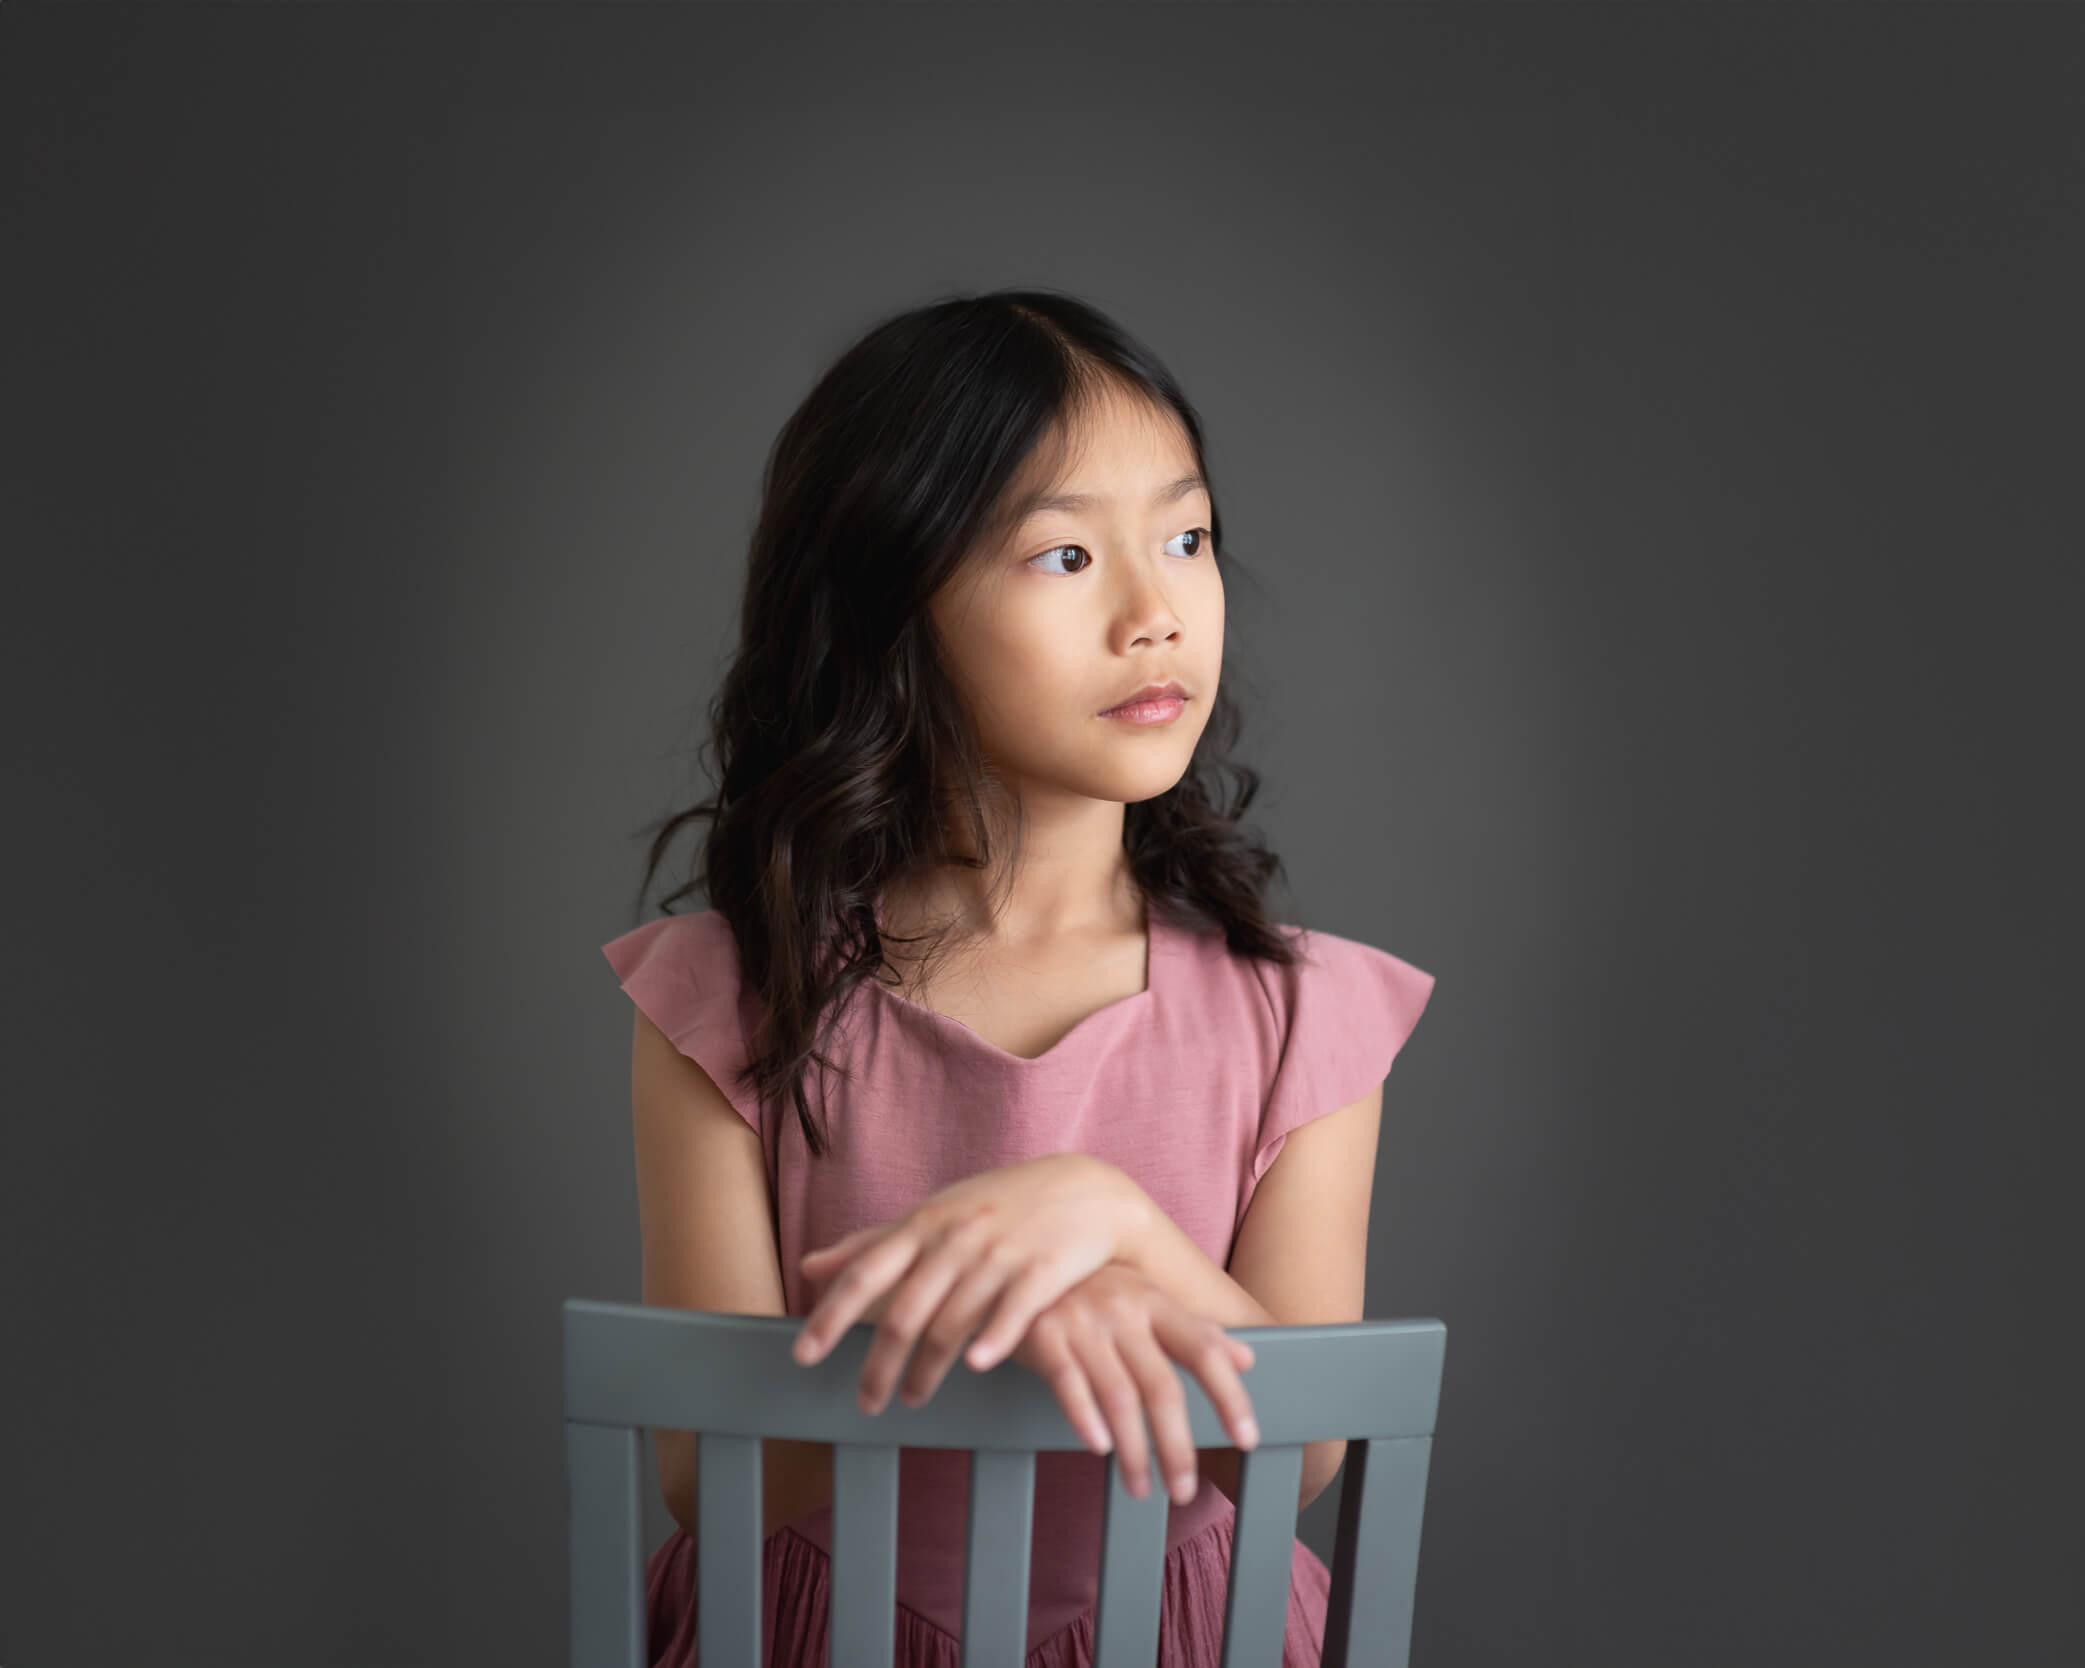 10 year old girl in a blush colored dress sitting backwards on a chair looking away